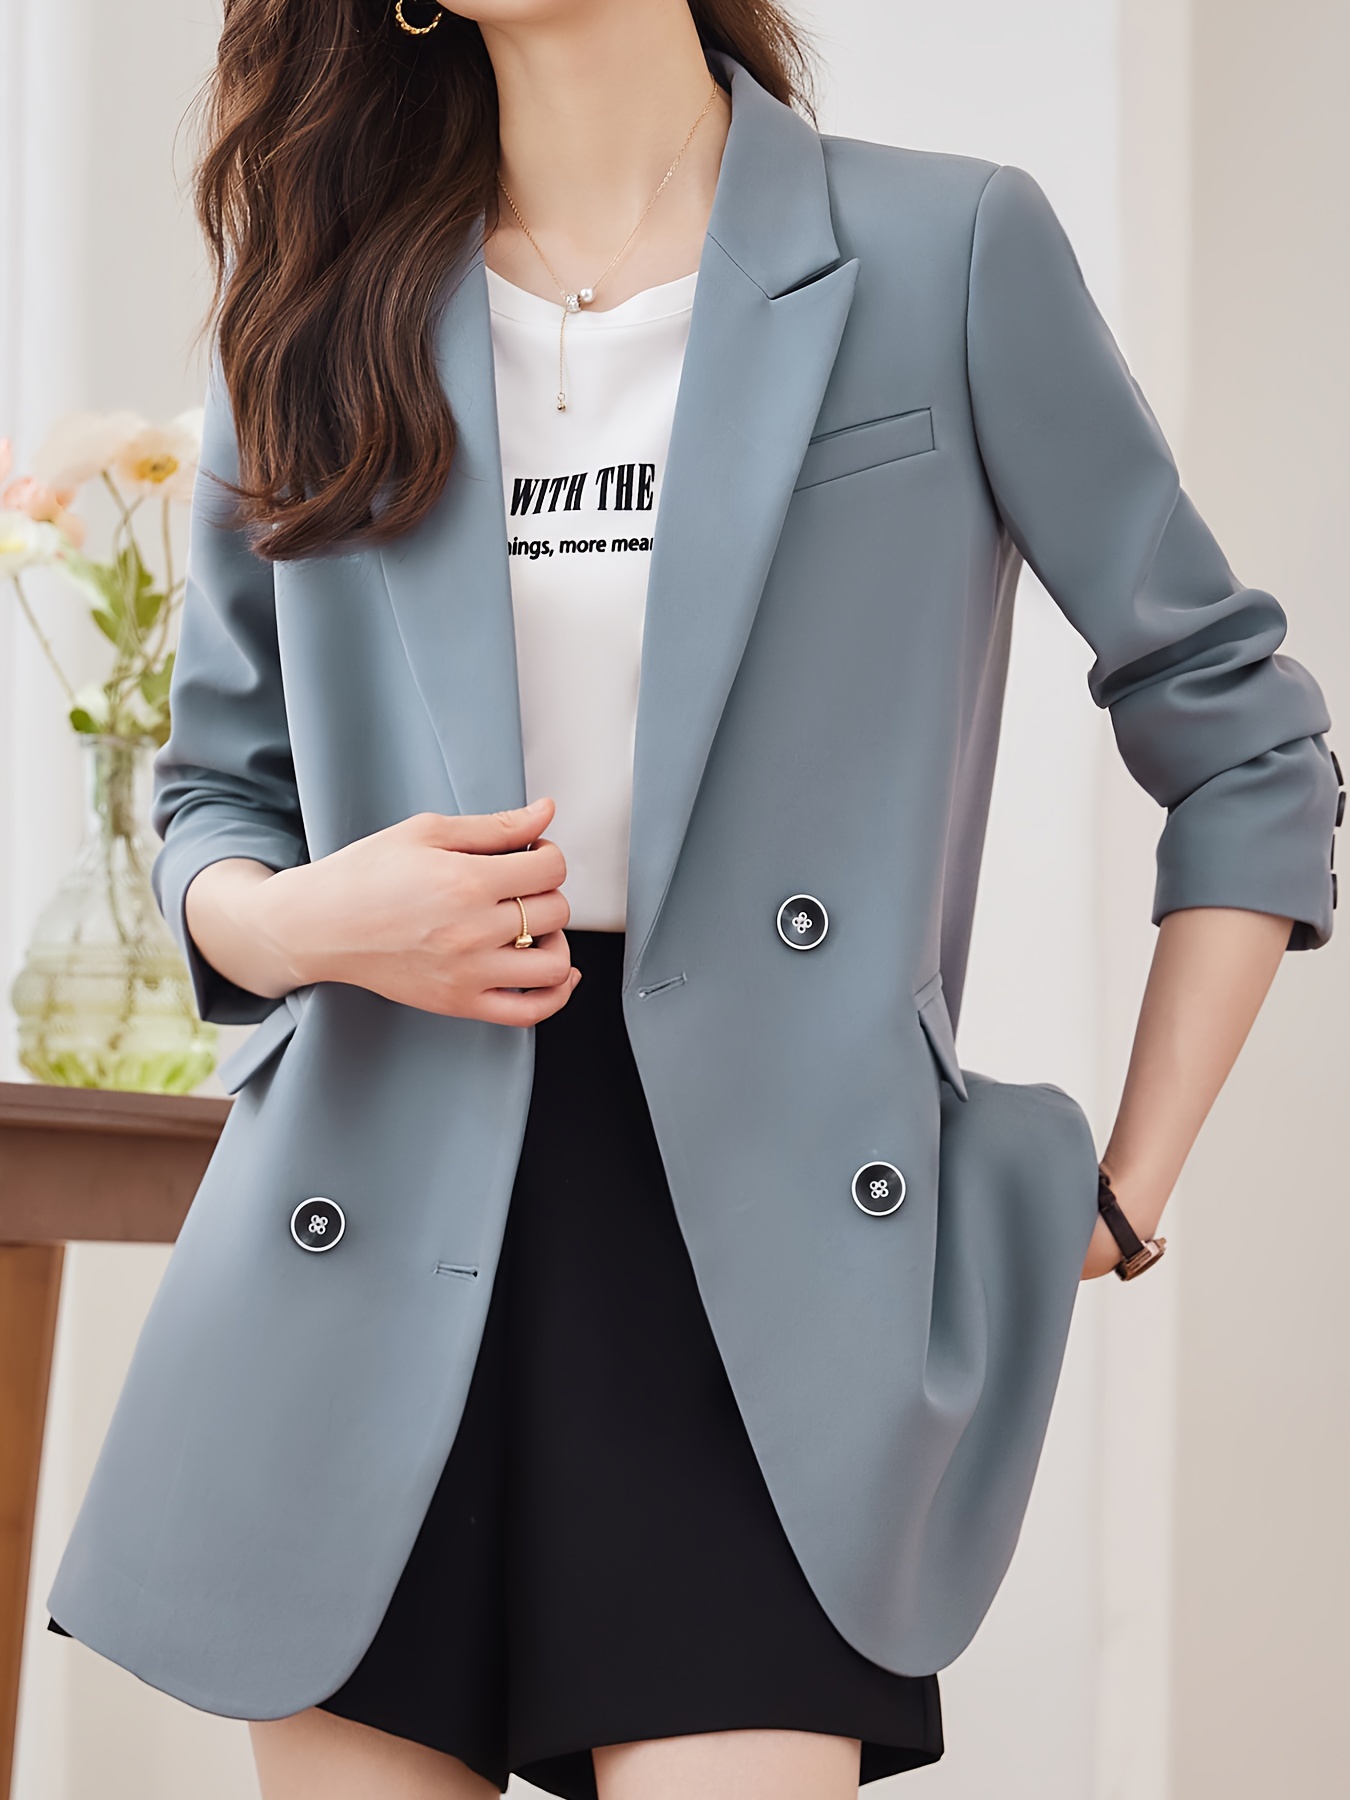 Notched Collar Double-breasted Blazer, Elegant Long Sleeve Blazer For Office & Work, Women s Clothing details 19